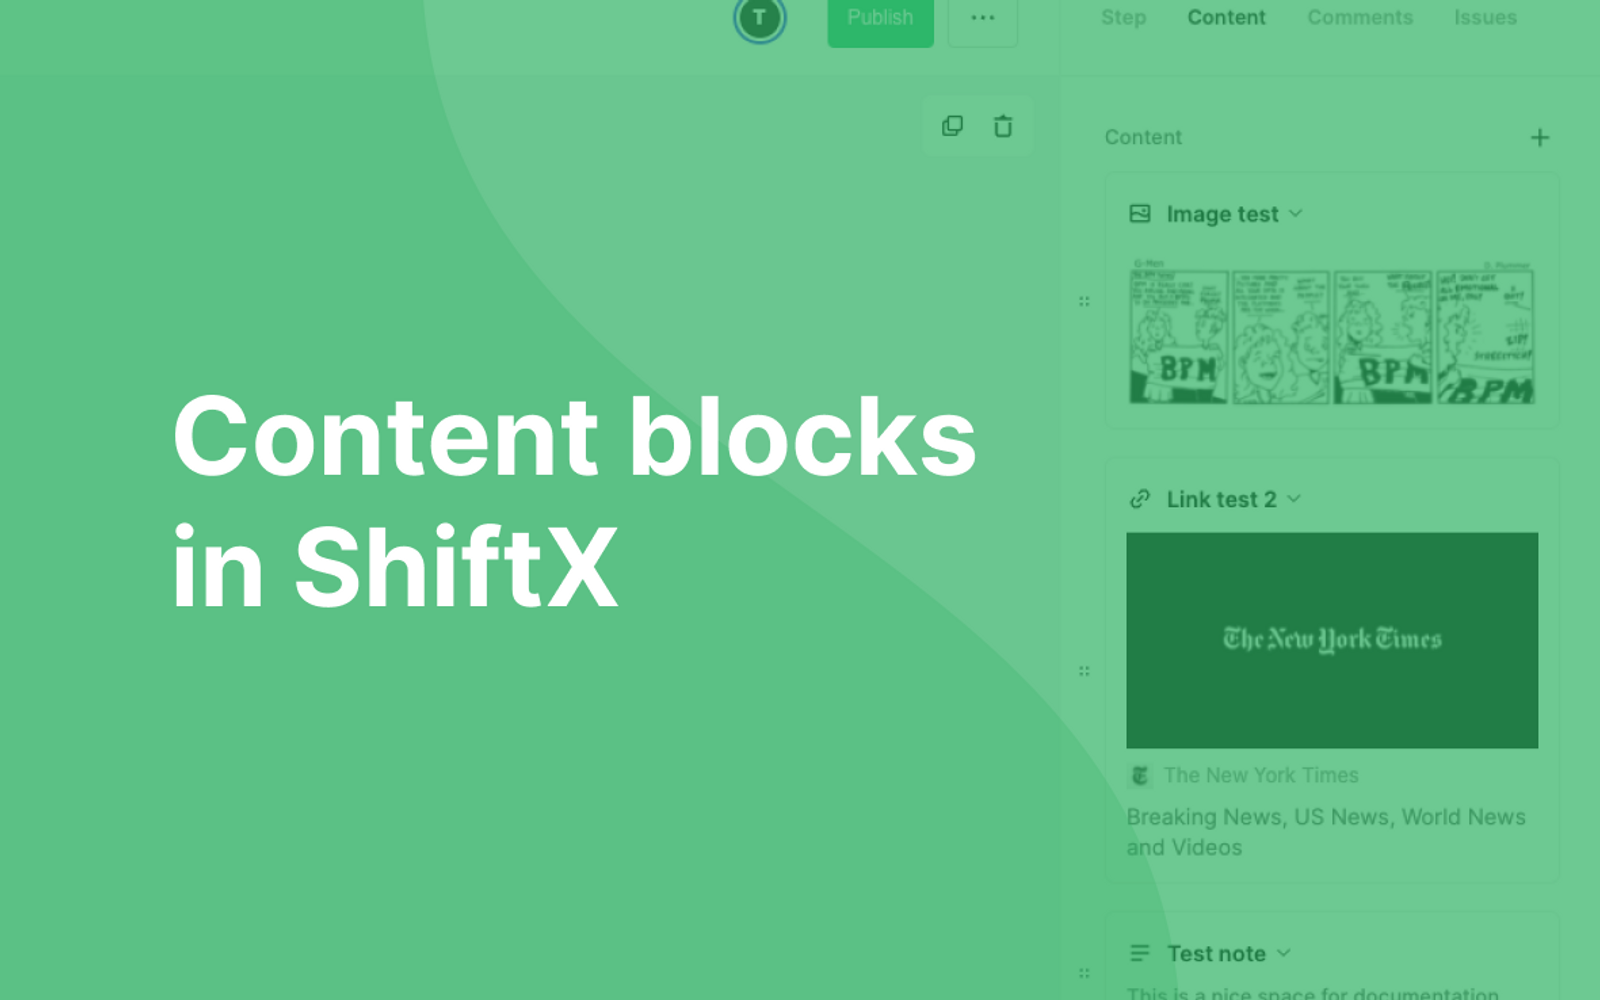 The text "Content blocks in ShiftX" written over a green transparent background, and a screenshot from the content blocks panel in ShiftX